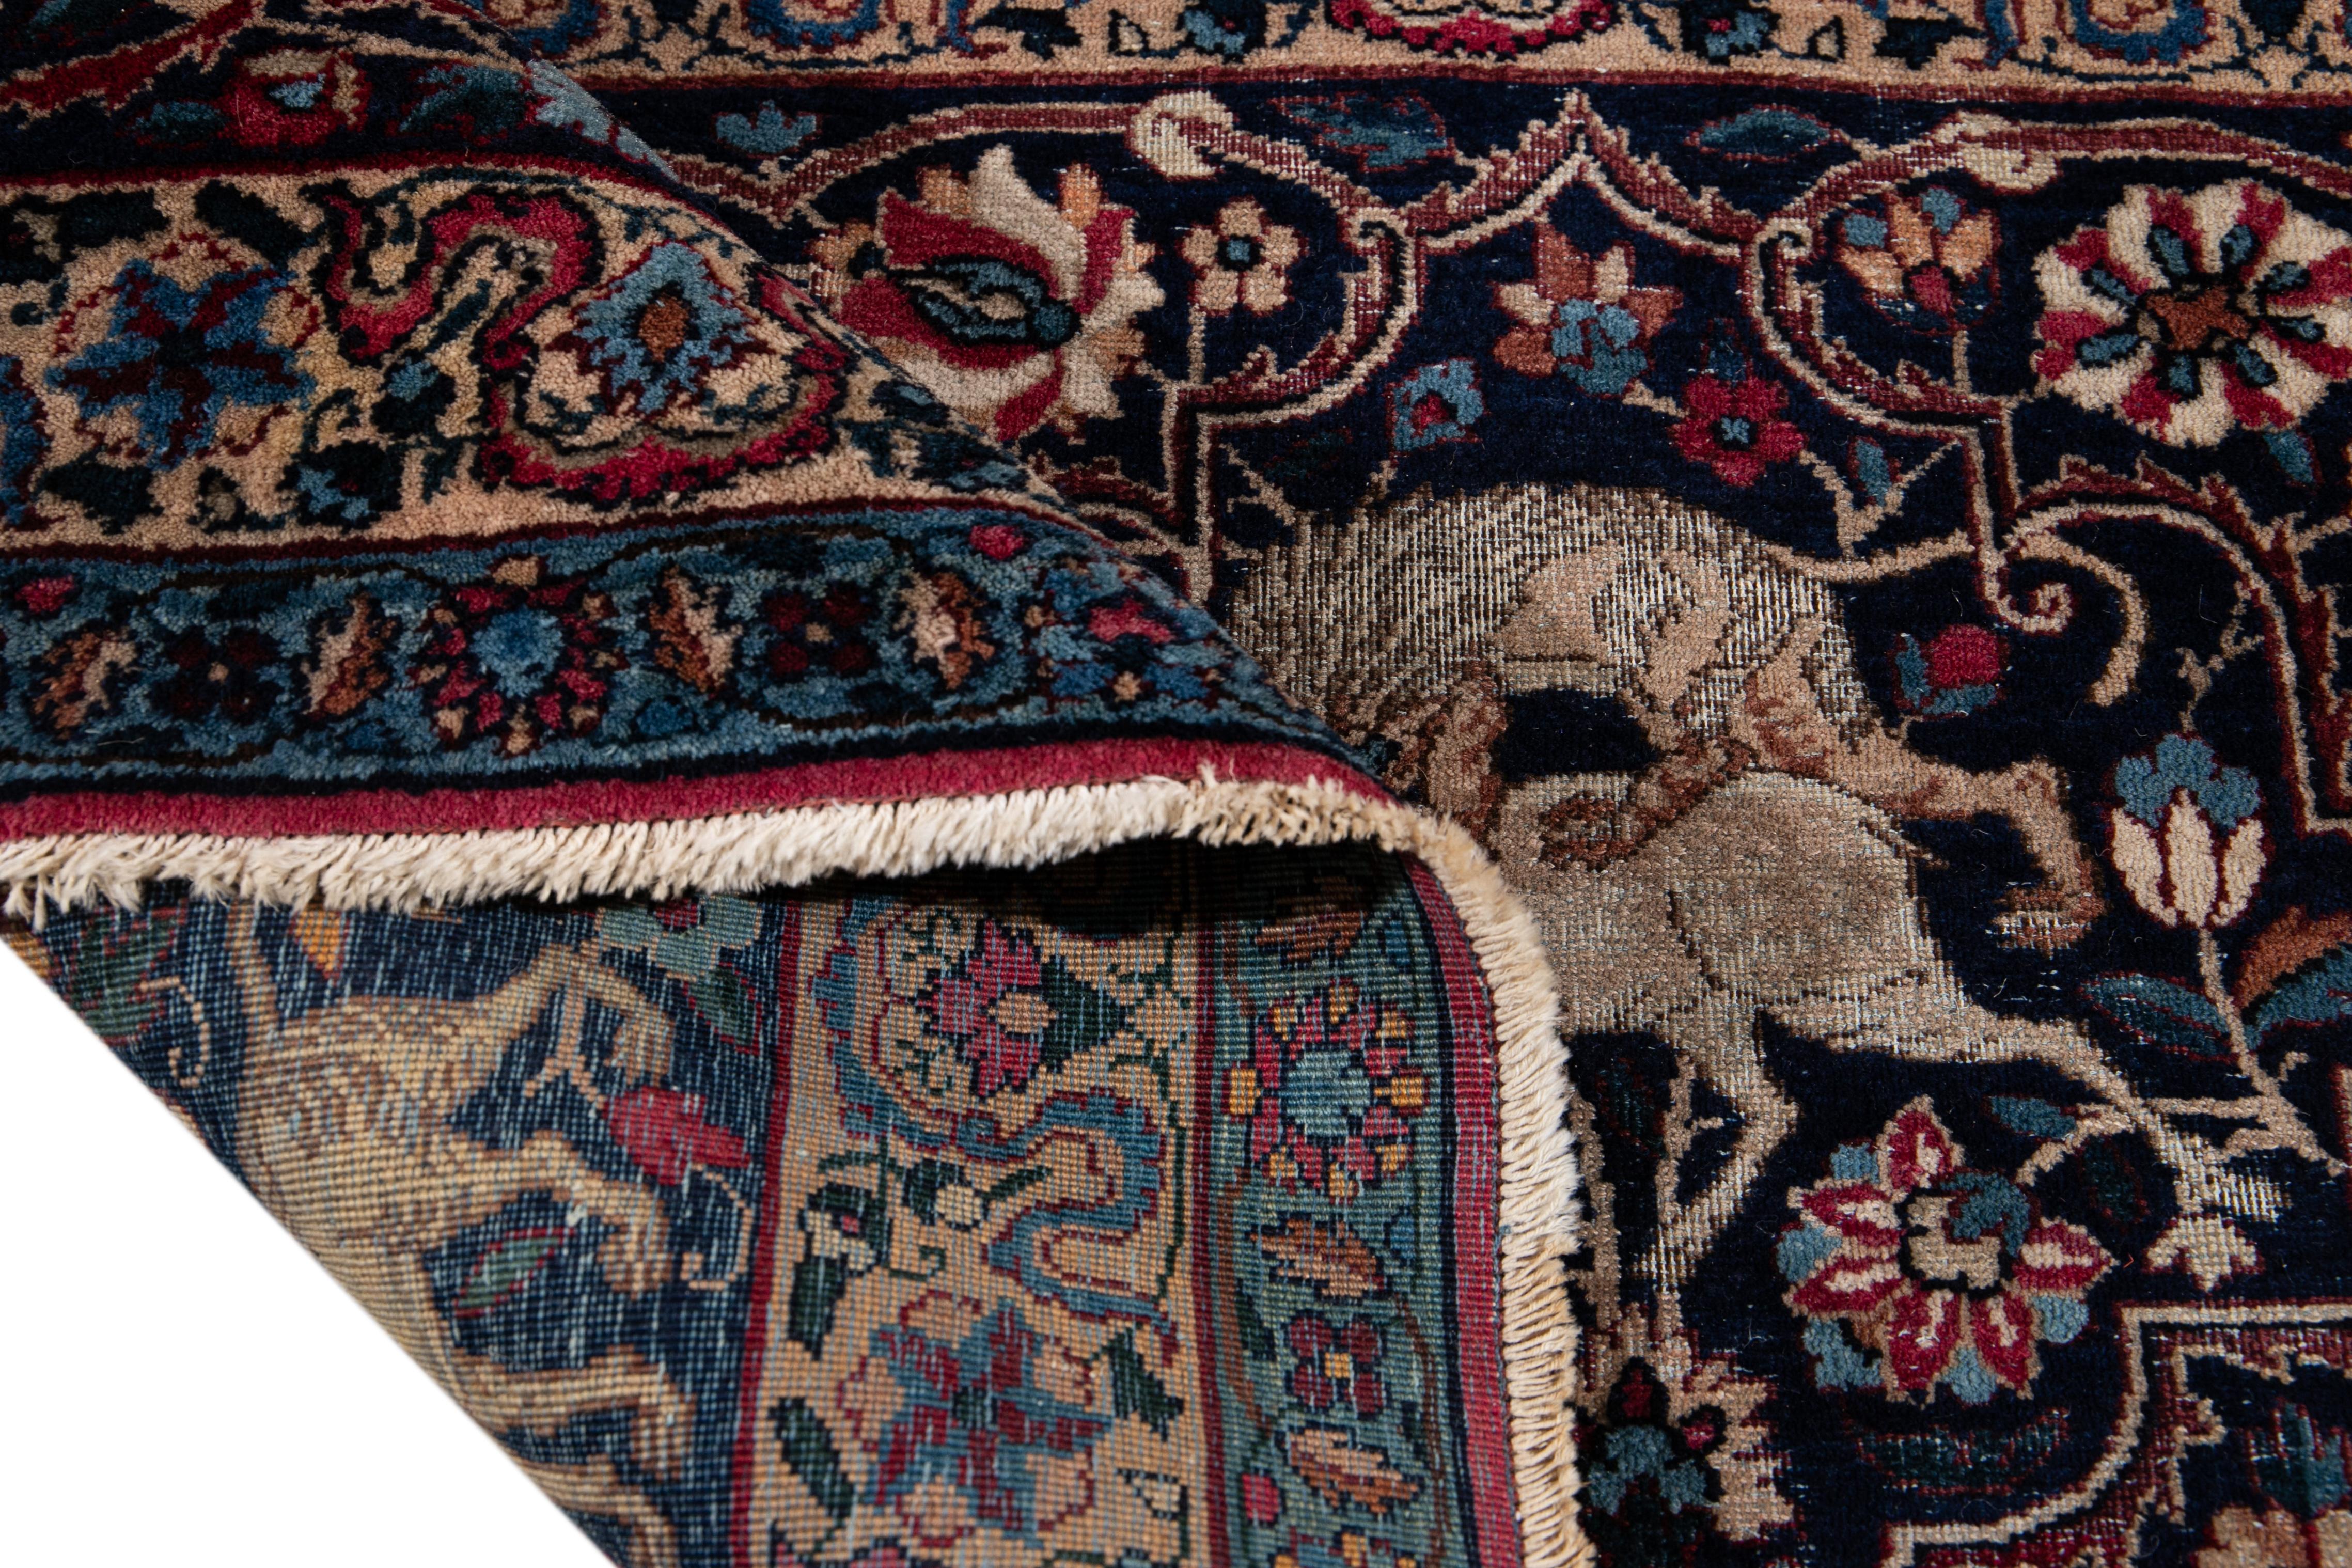 Beautiful antique Persian Kerman handmade oversize wool rug with a red field. This Kerman rug has a blue frame and accents of blue, beige, and brown in a gorgeous all-over botanical animal distressed design.

This rug measures 13' x 17'2